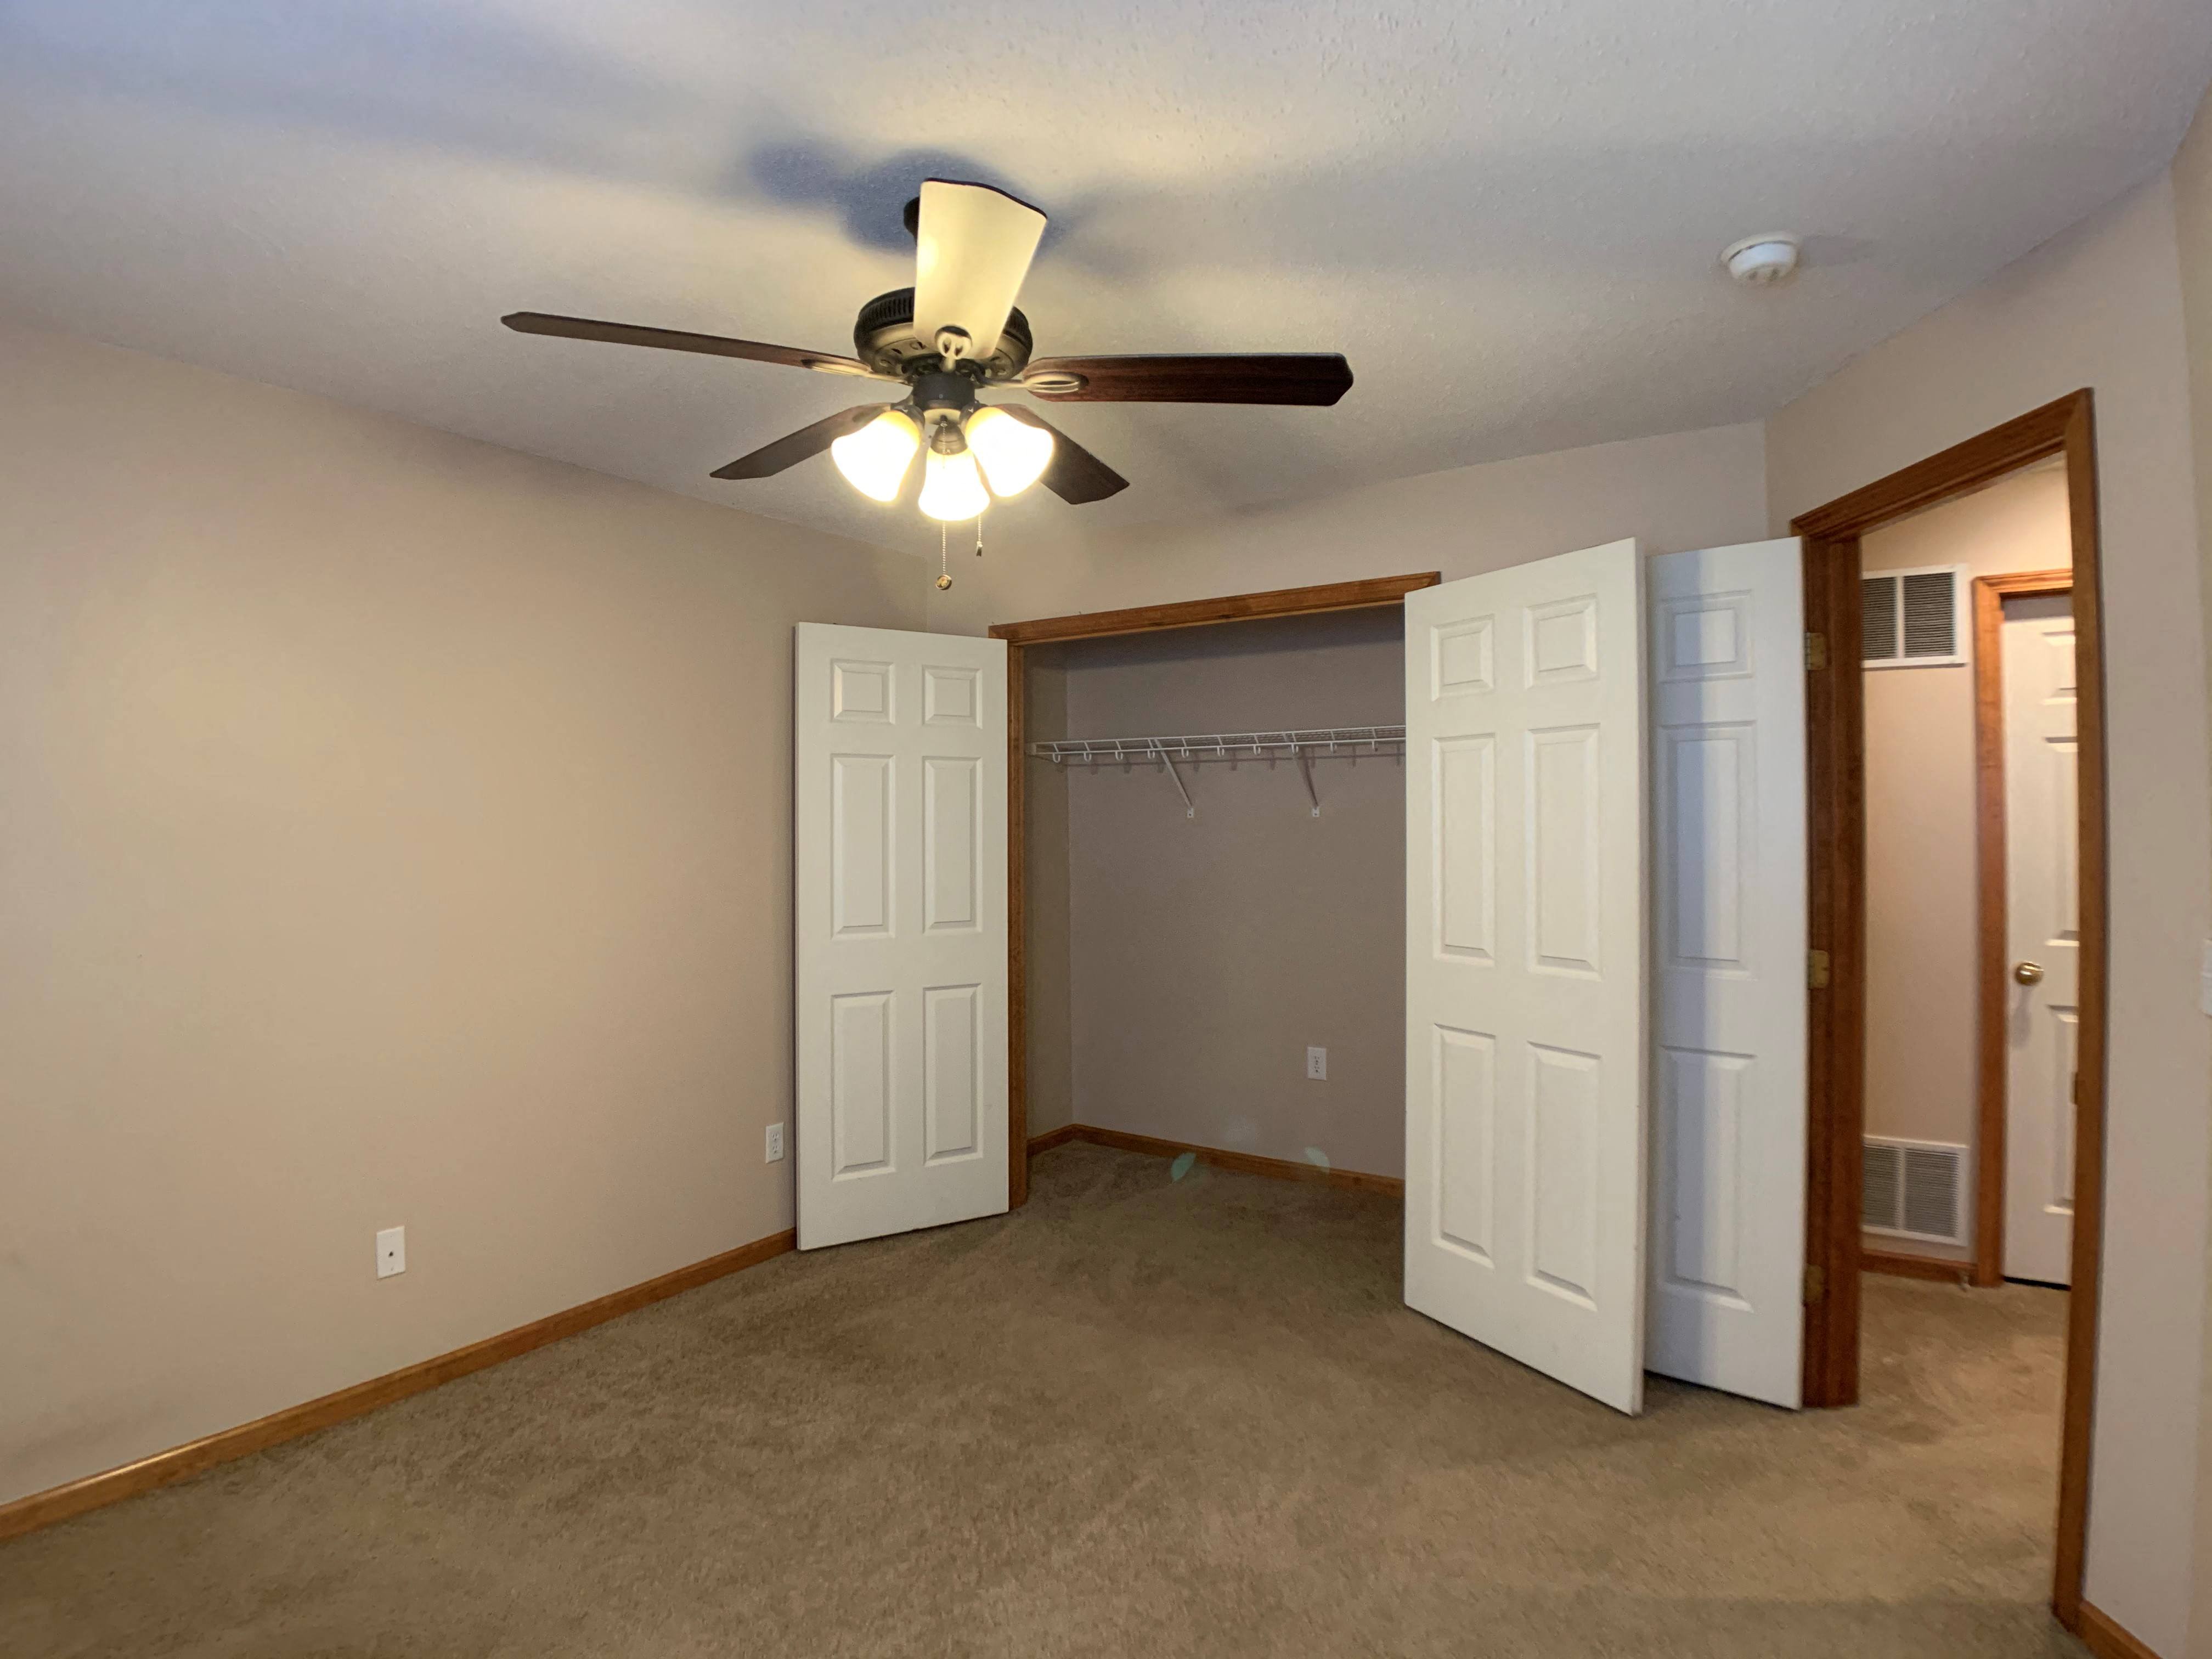 Second bedroom with large closet